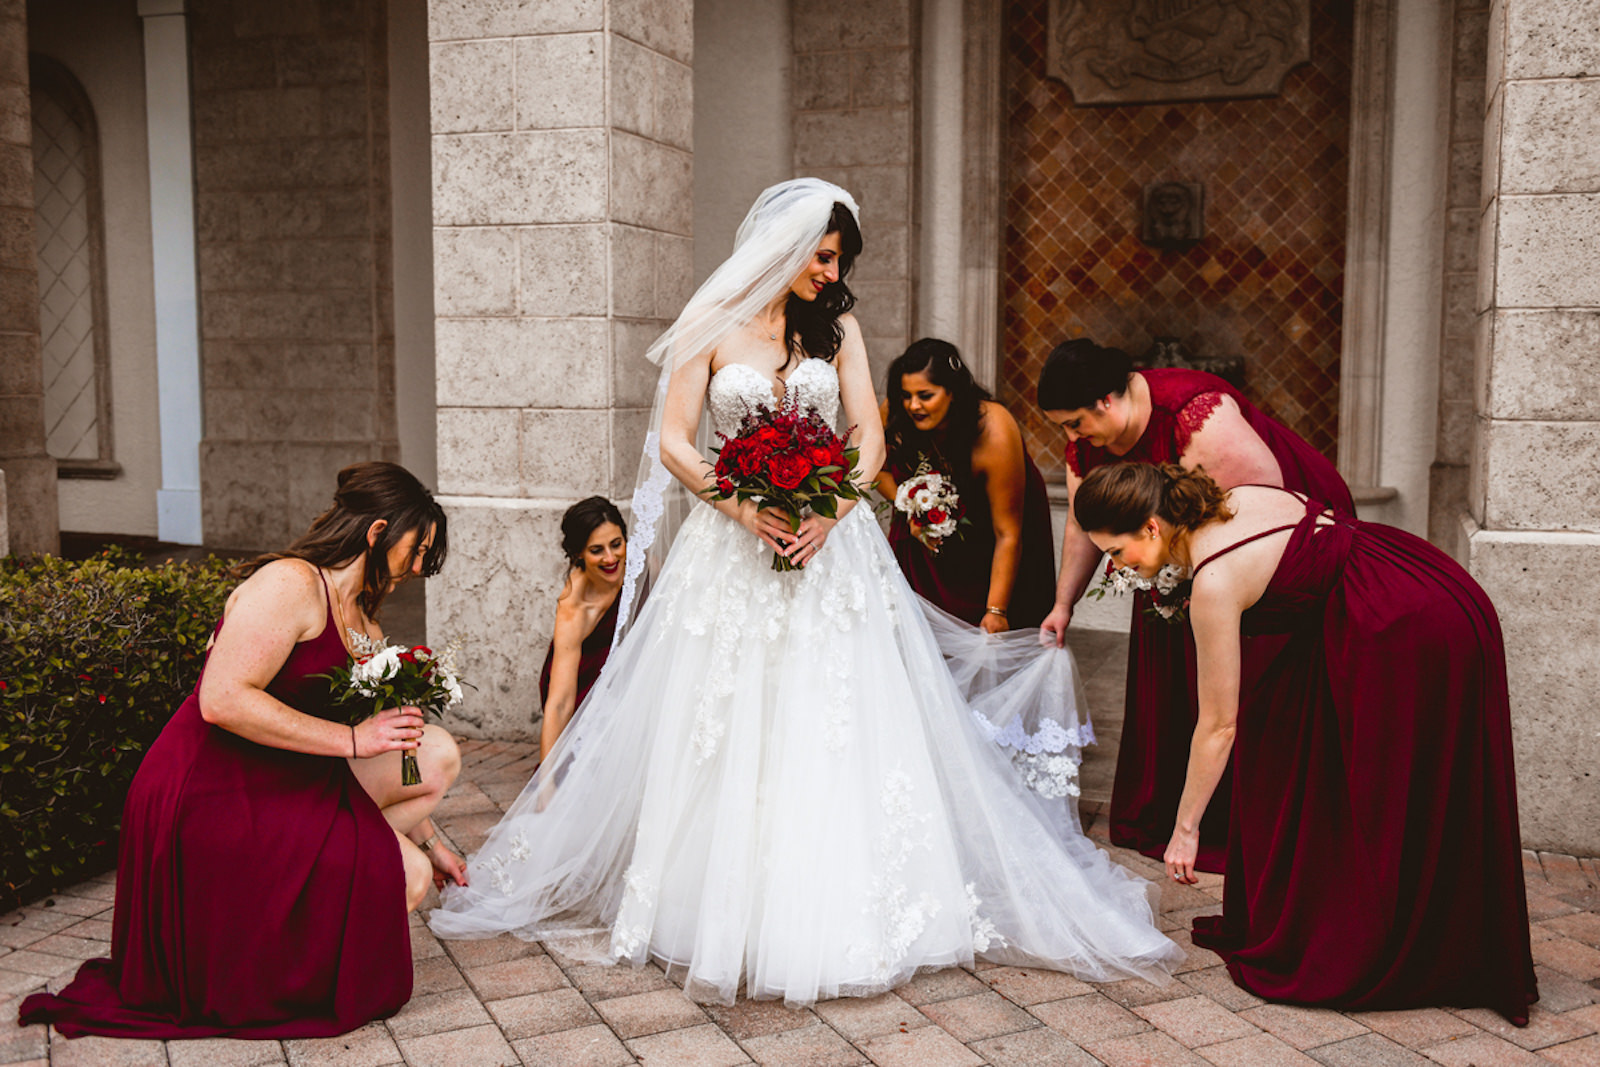 Florida Bride in Essense of Australia Strapless, Floral Applique and Tulle Skirt A-Line Wedding Dress Getting Ready with Bridesmaids in Burgundy Red Mix and Match Dresses Holding Red Floral Bouquets